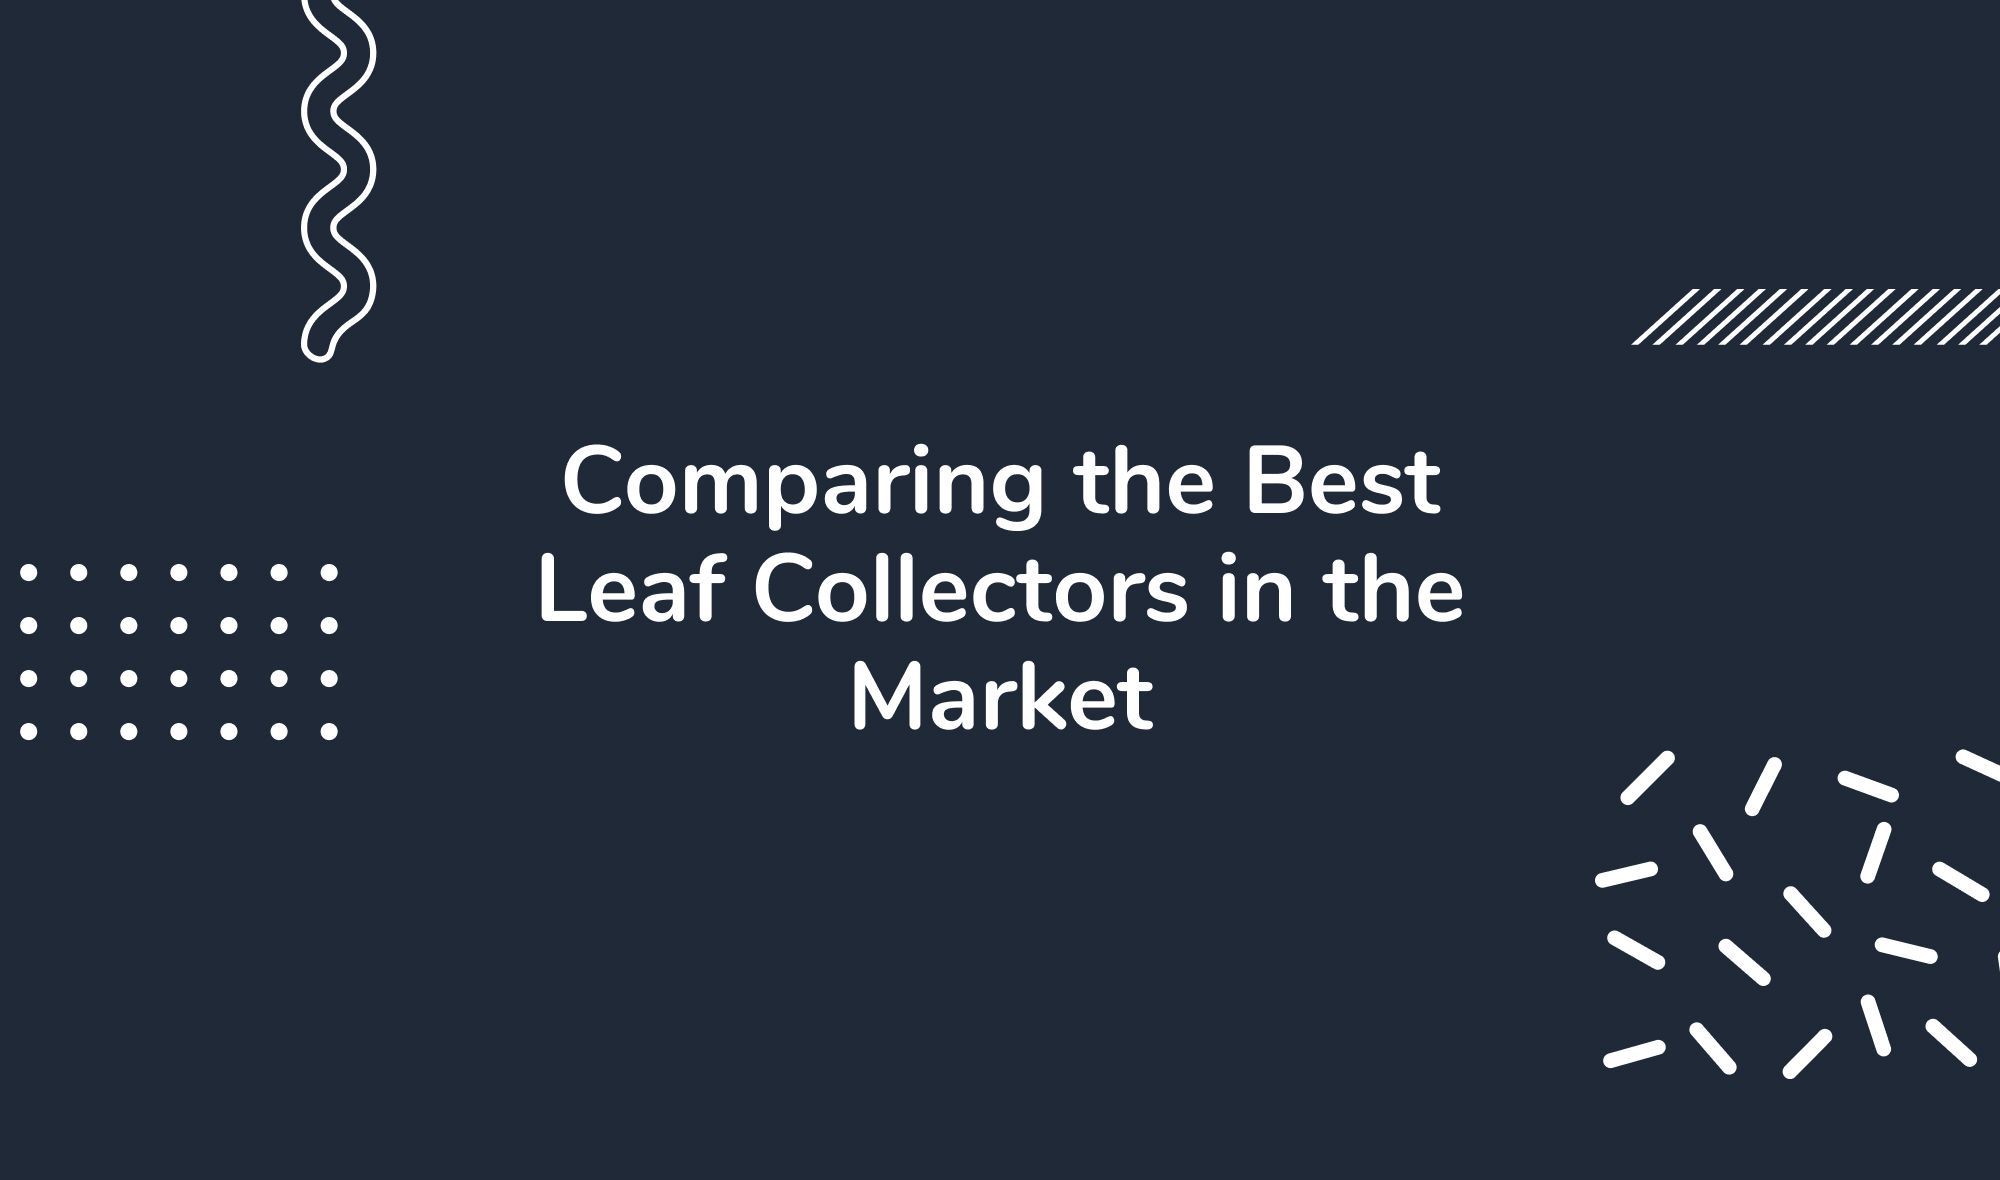 Comparing the Best Leaf Collectors in the Market